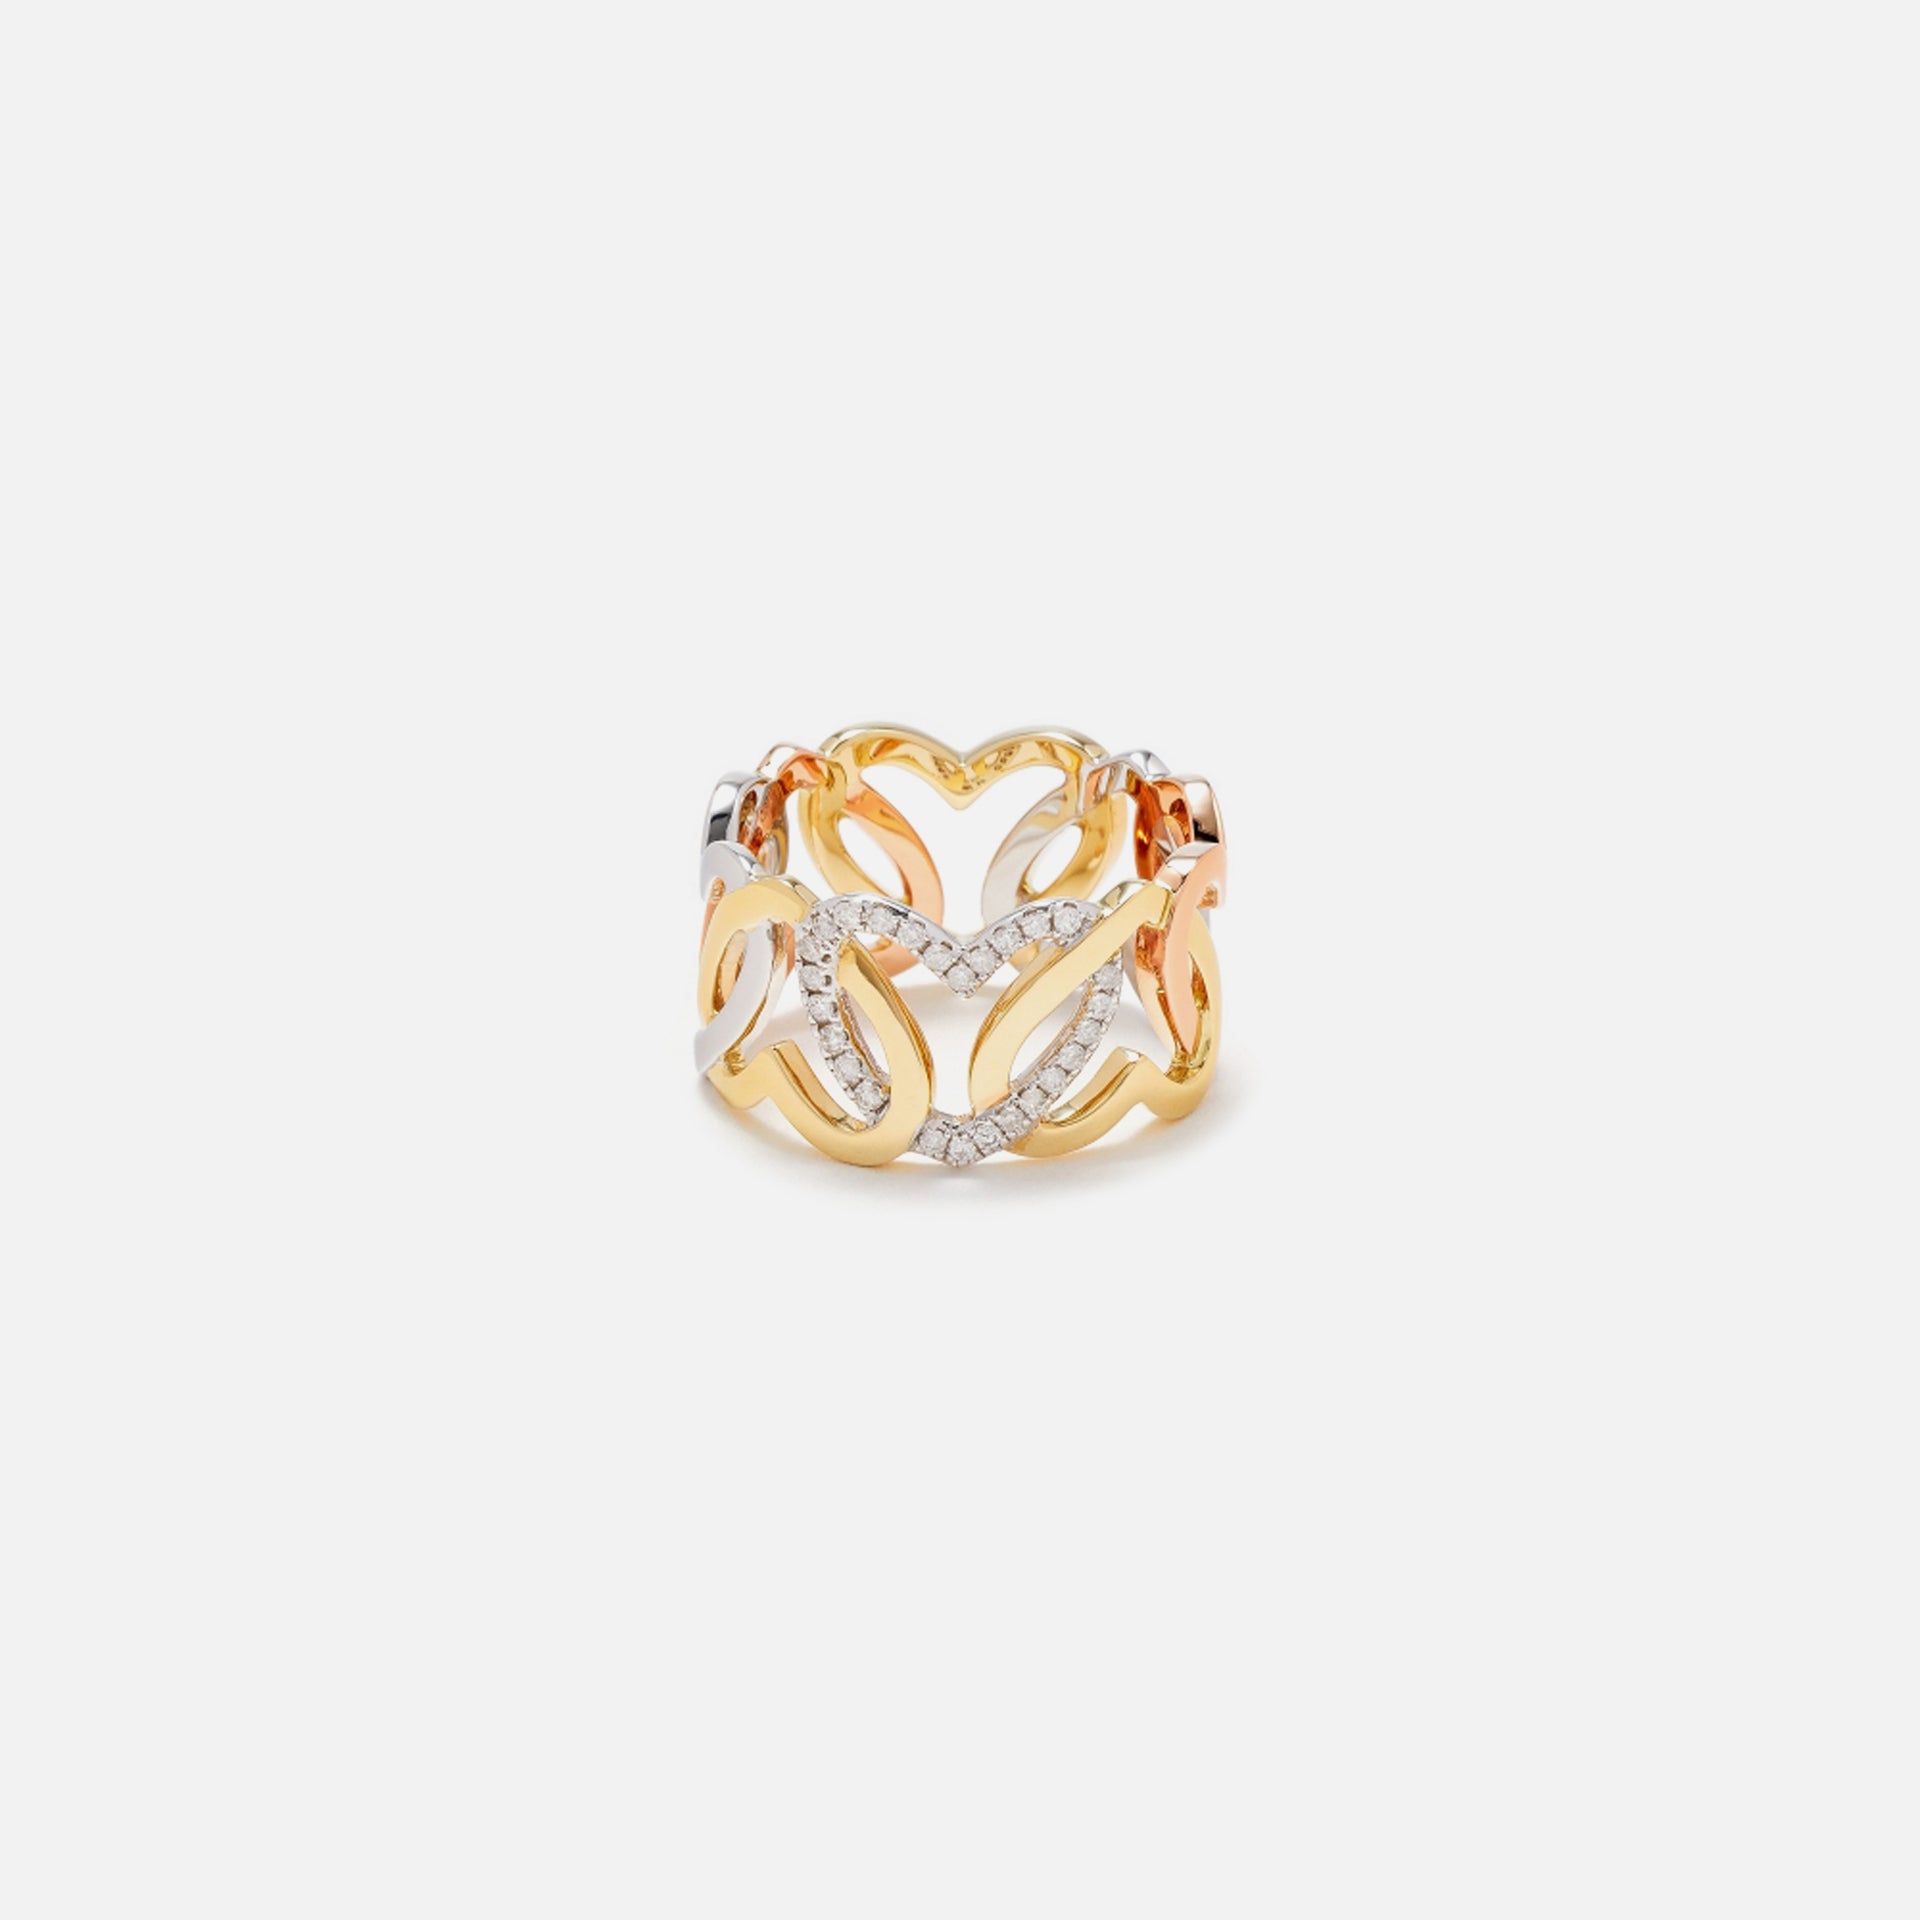 Yvonne Leon Bague Maille Coeurs 3 Ors Heart Ring - Multi